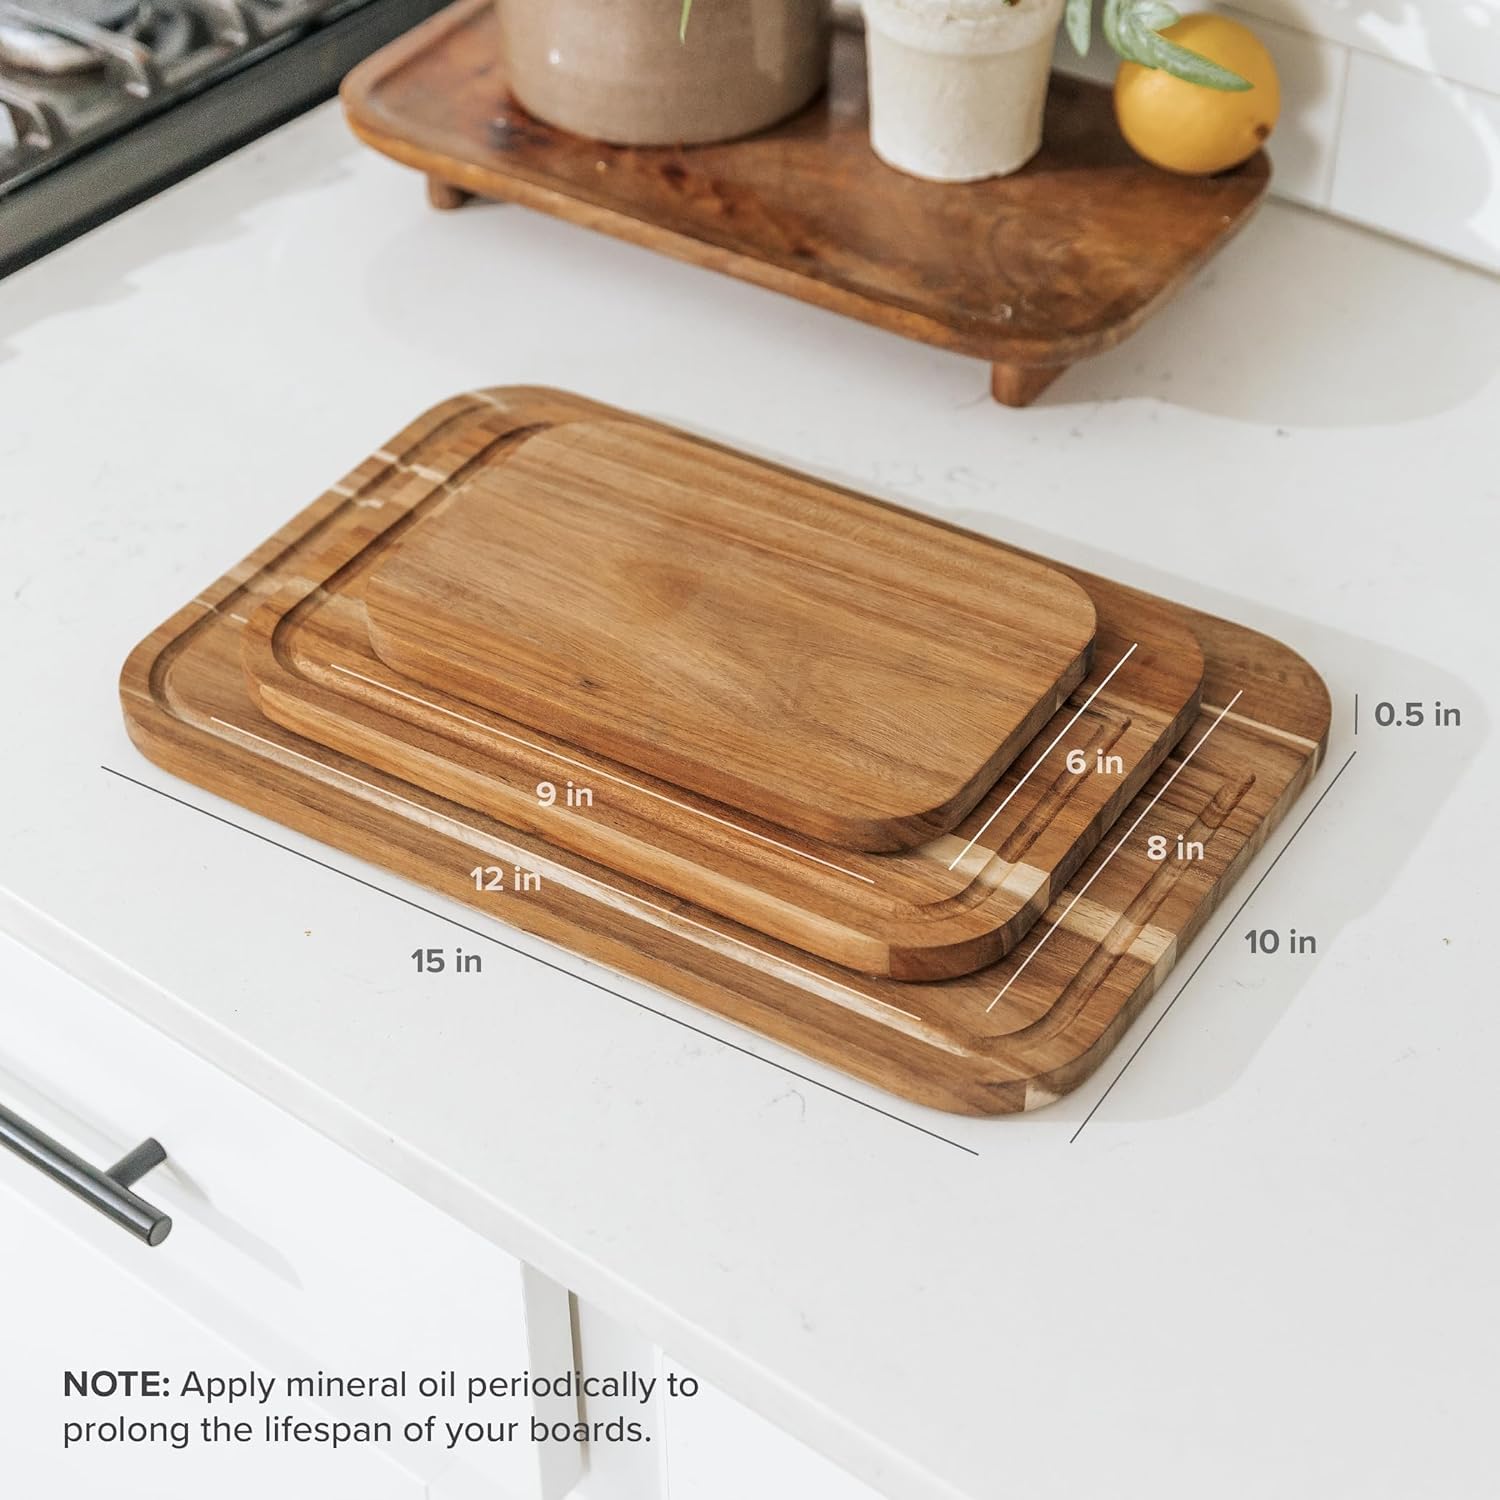 KitchenEdge Premium Acacia Wood Cutting Board Set of 3, Juice Groove and Non-Slip Feet, Thick Wood Trays for cheese, vegetables, meat, fruit, Heavy Duty Construction, Pre Oiled (9x6, 12x8, 15x10 inch)